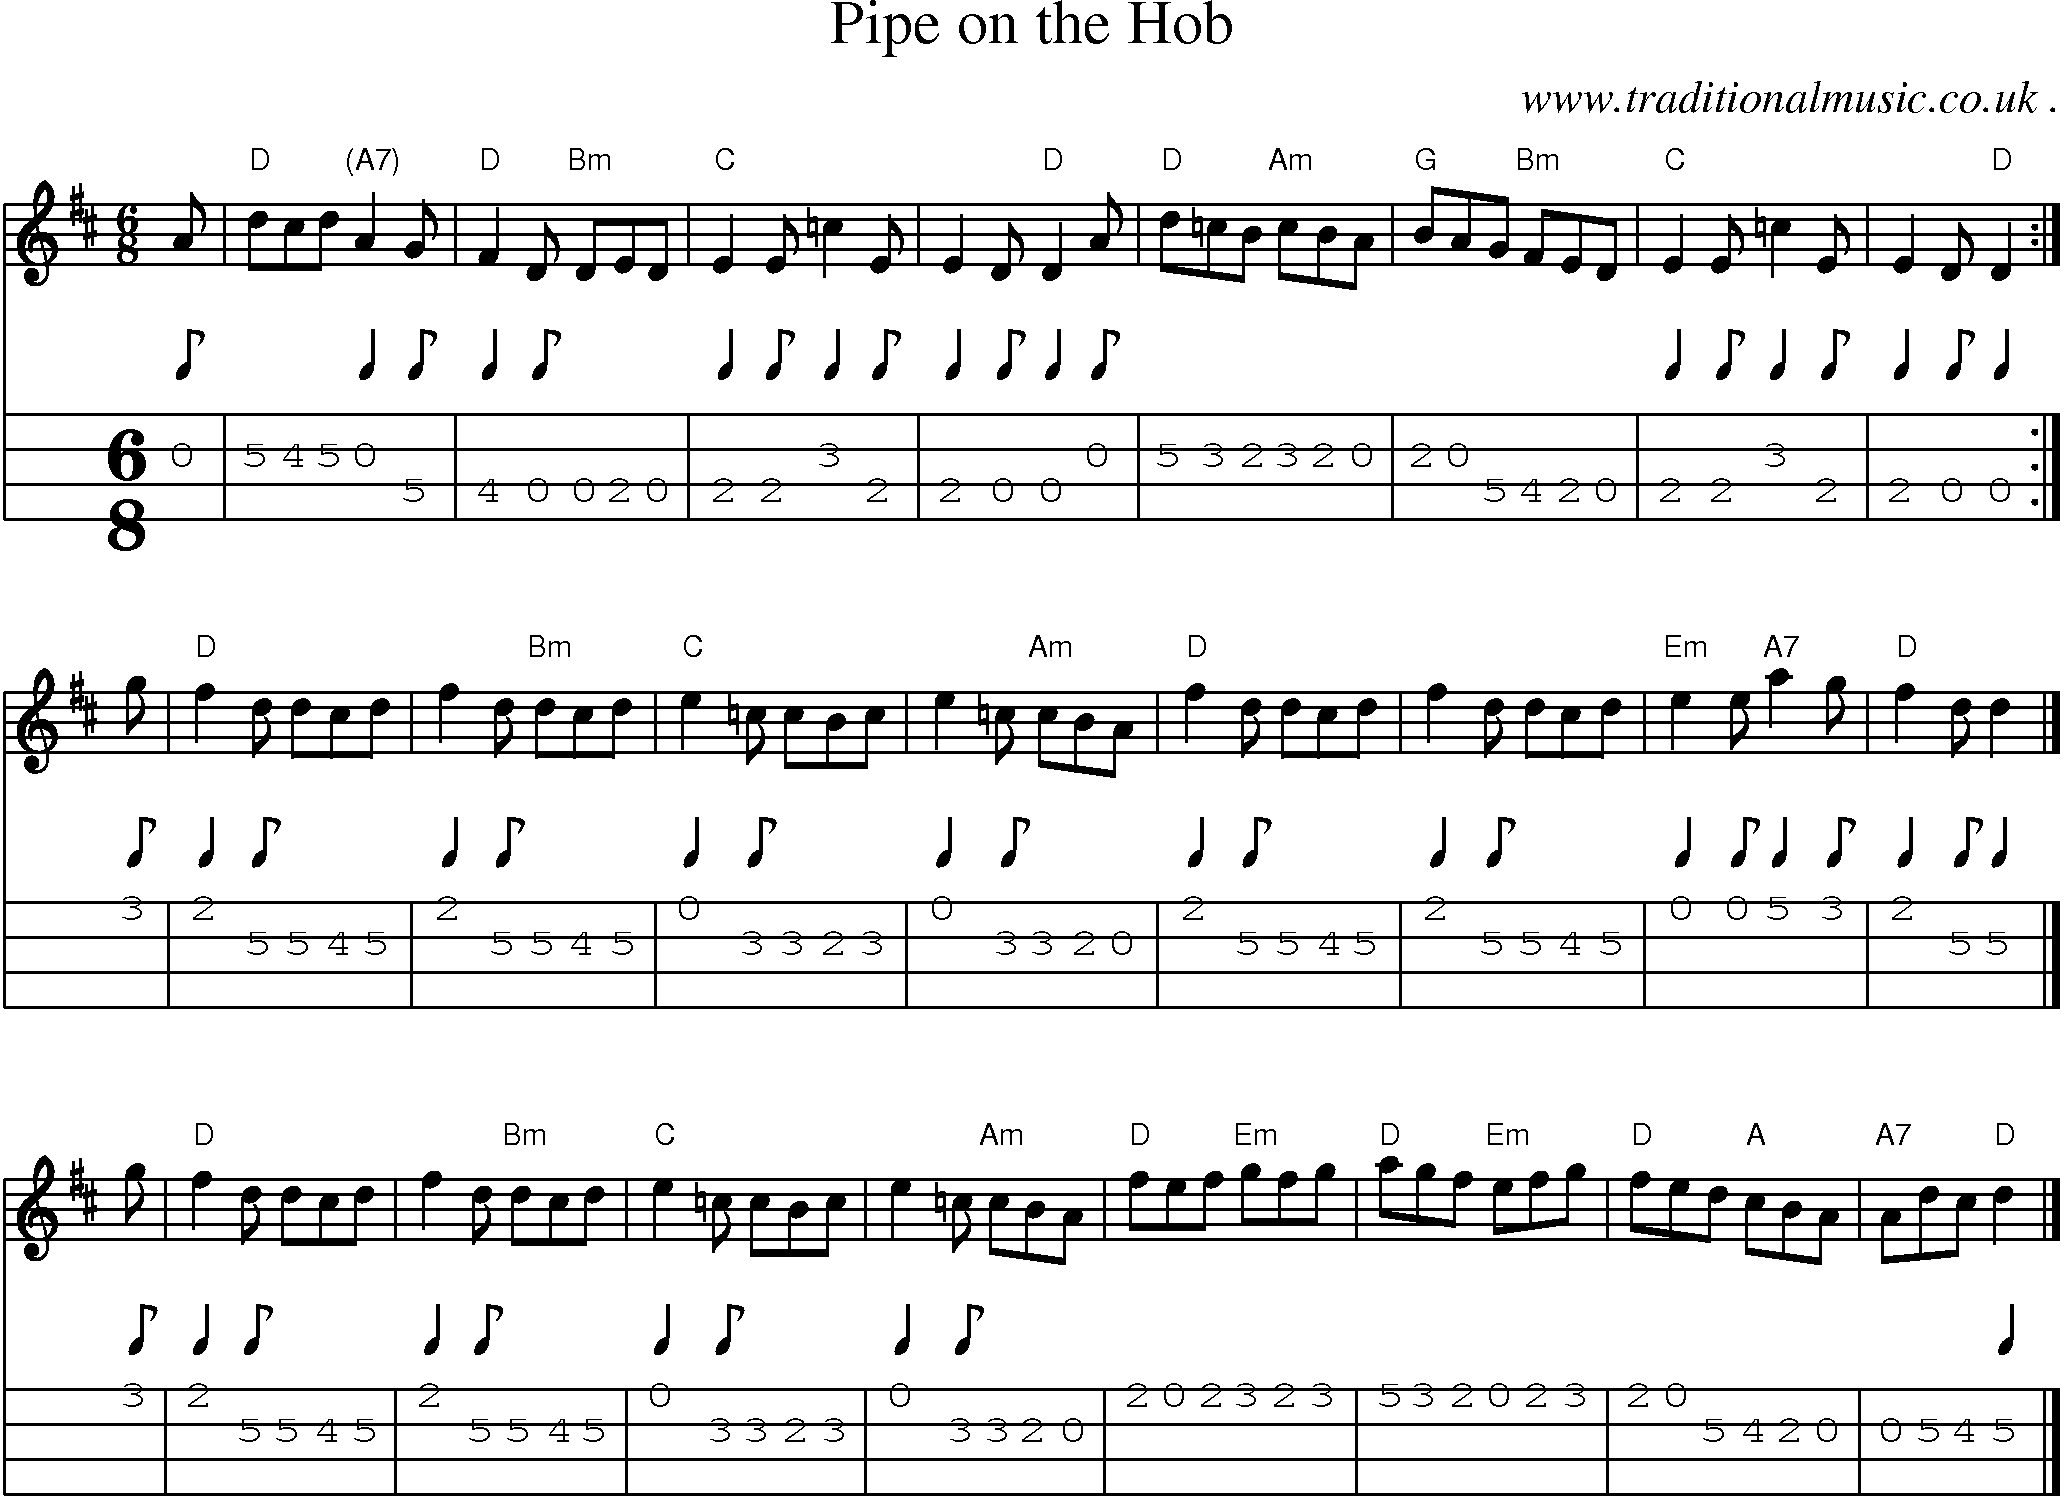 Sheet-music  score, Chords and Mandolin Tabs for Pipe On The Hob